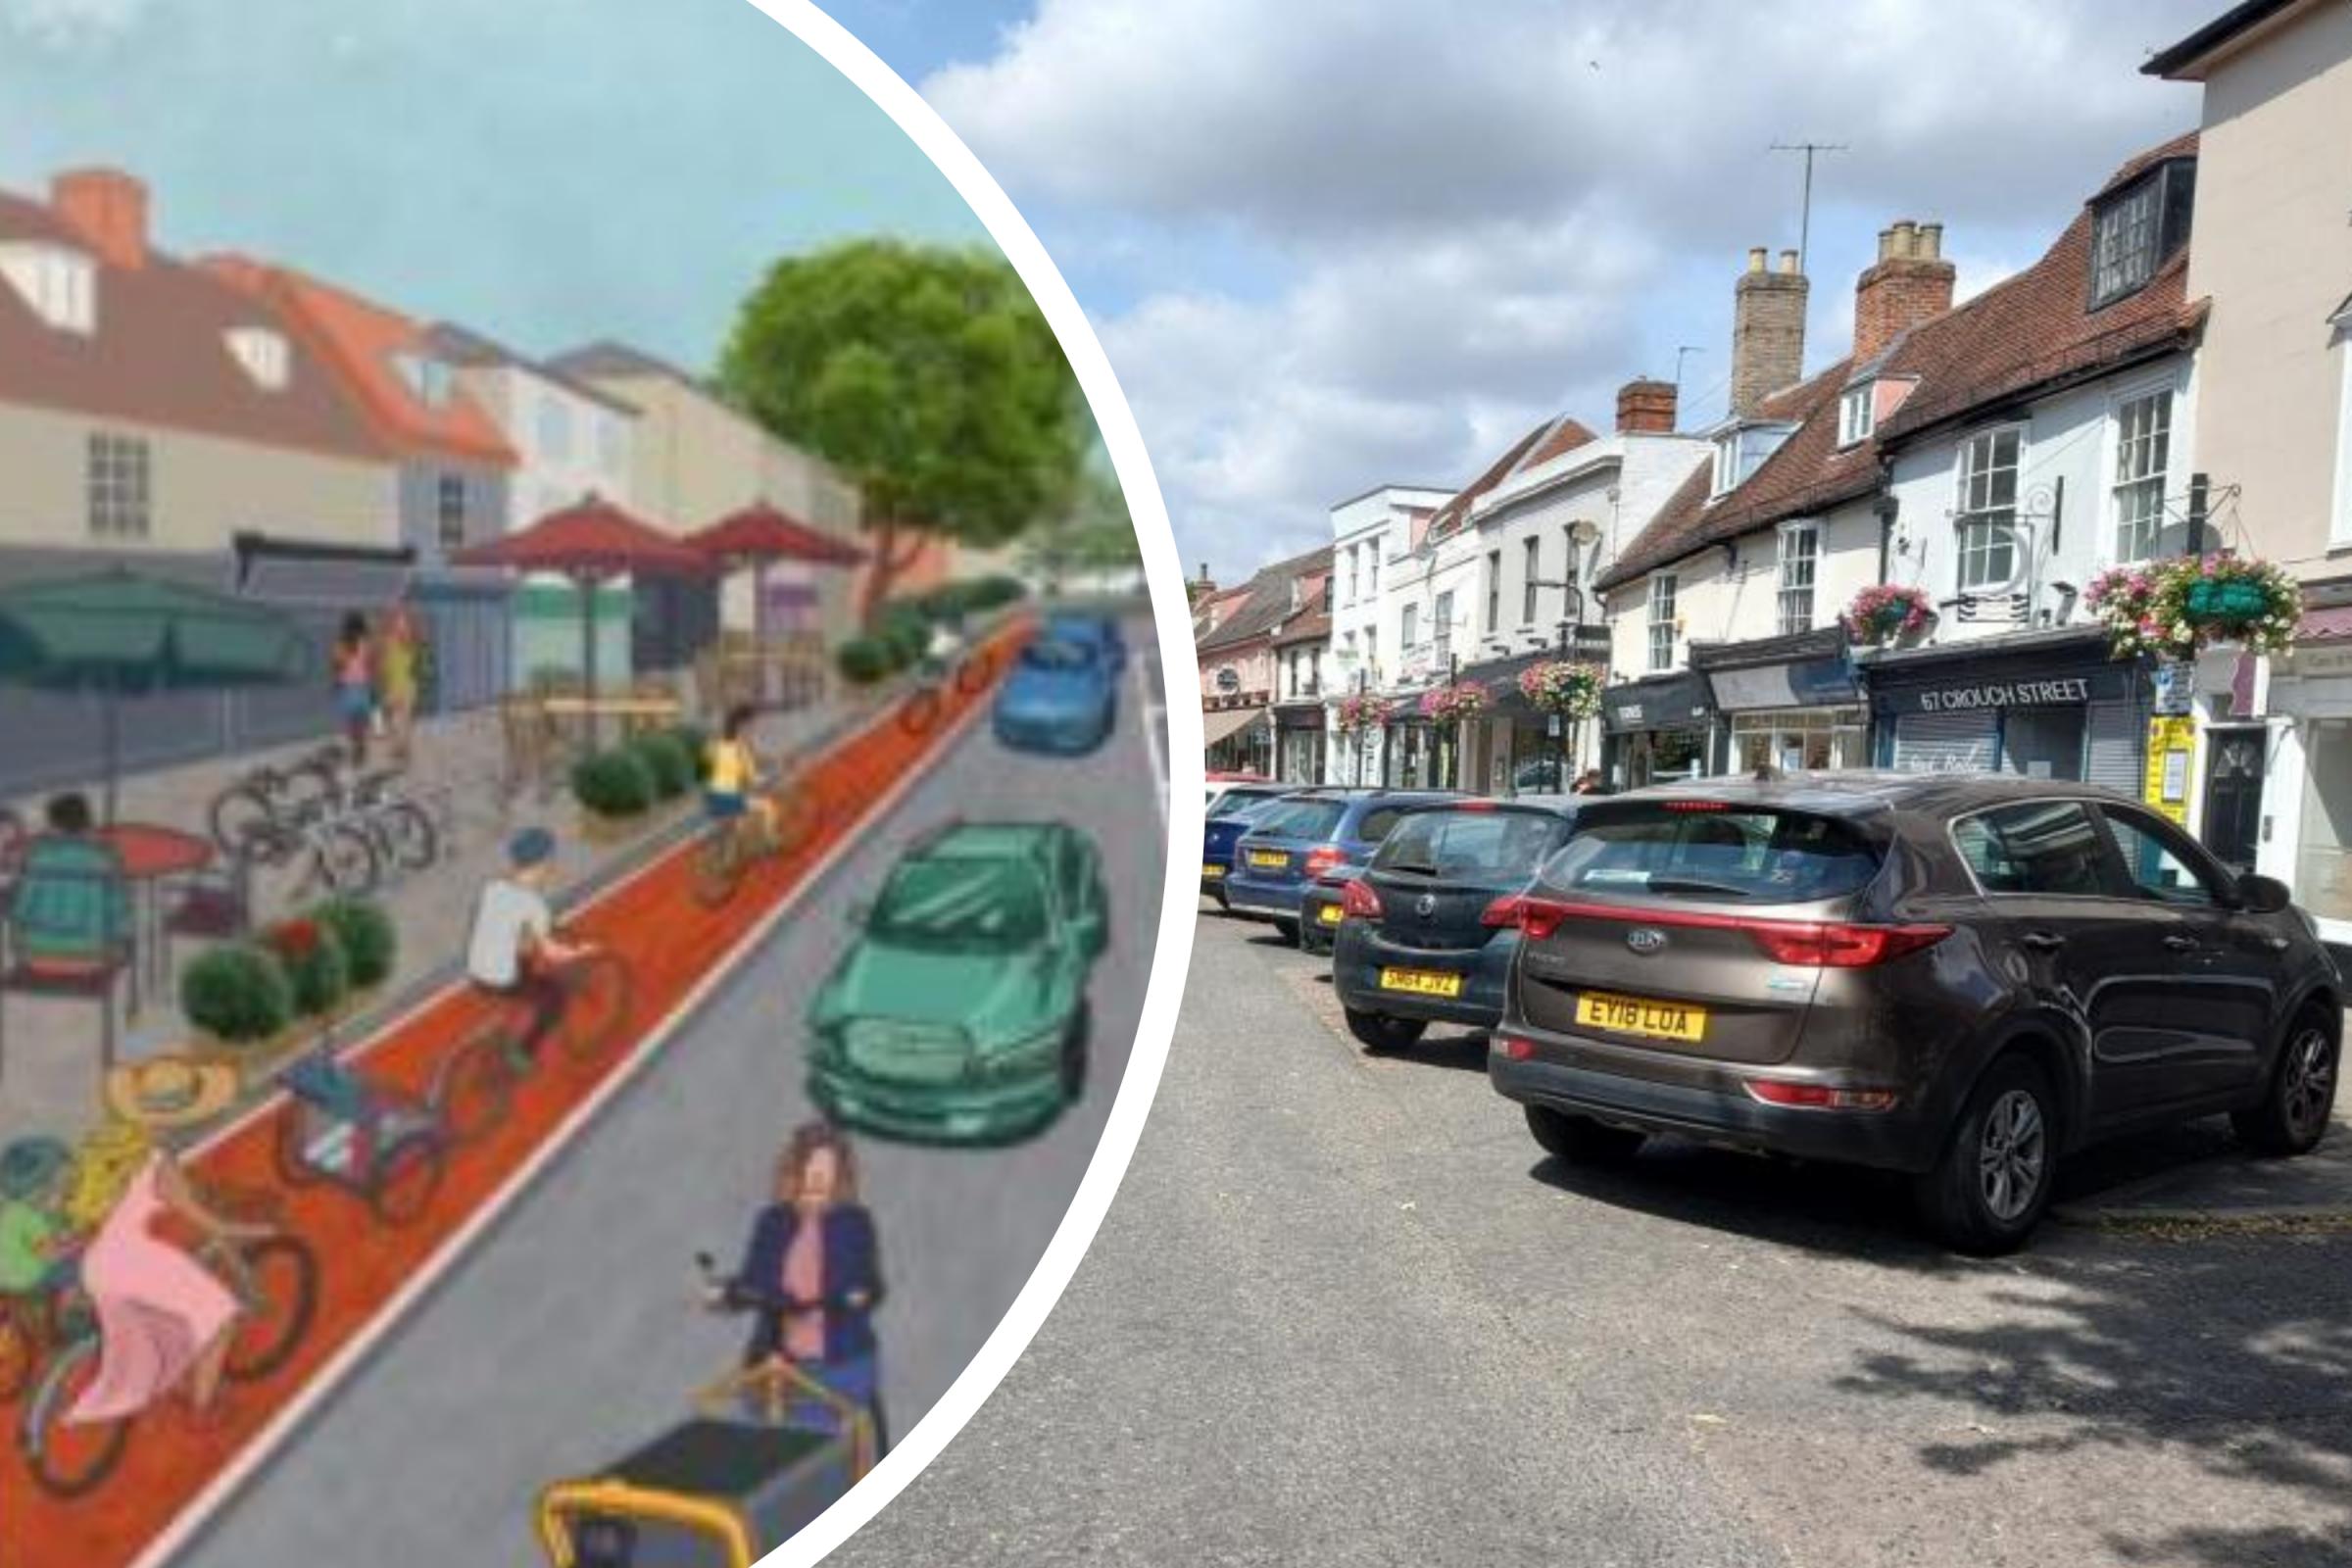 Colchester council bosses defend Crouch Street West revamp